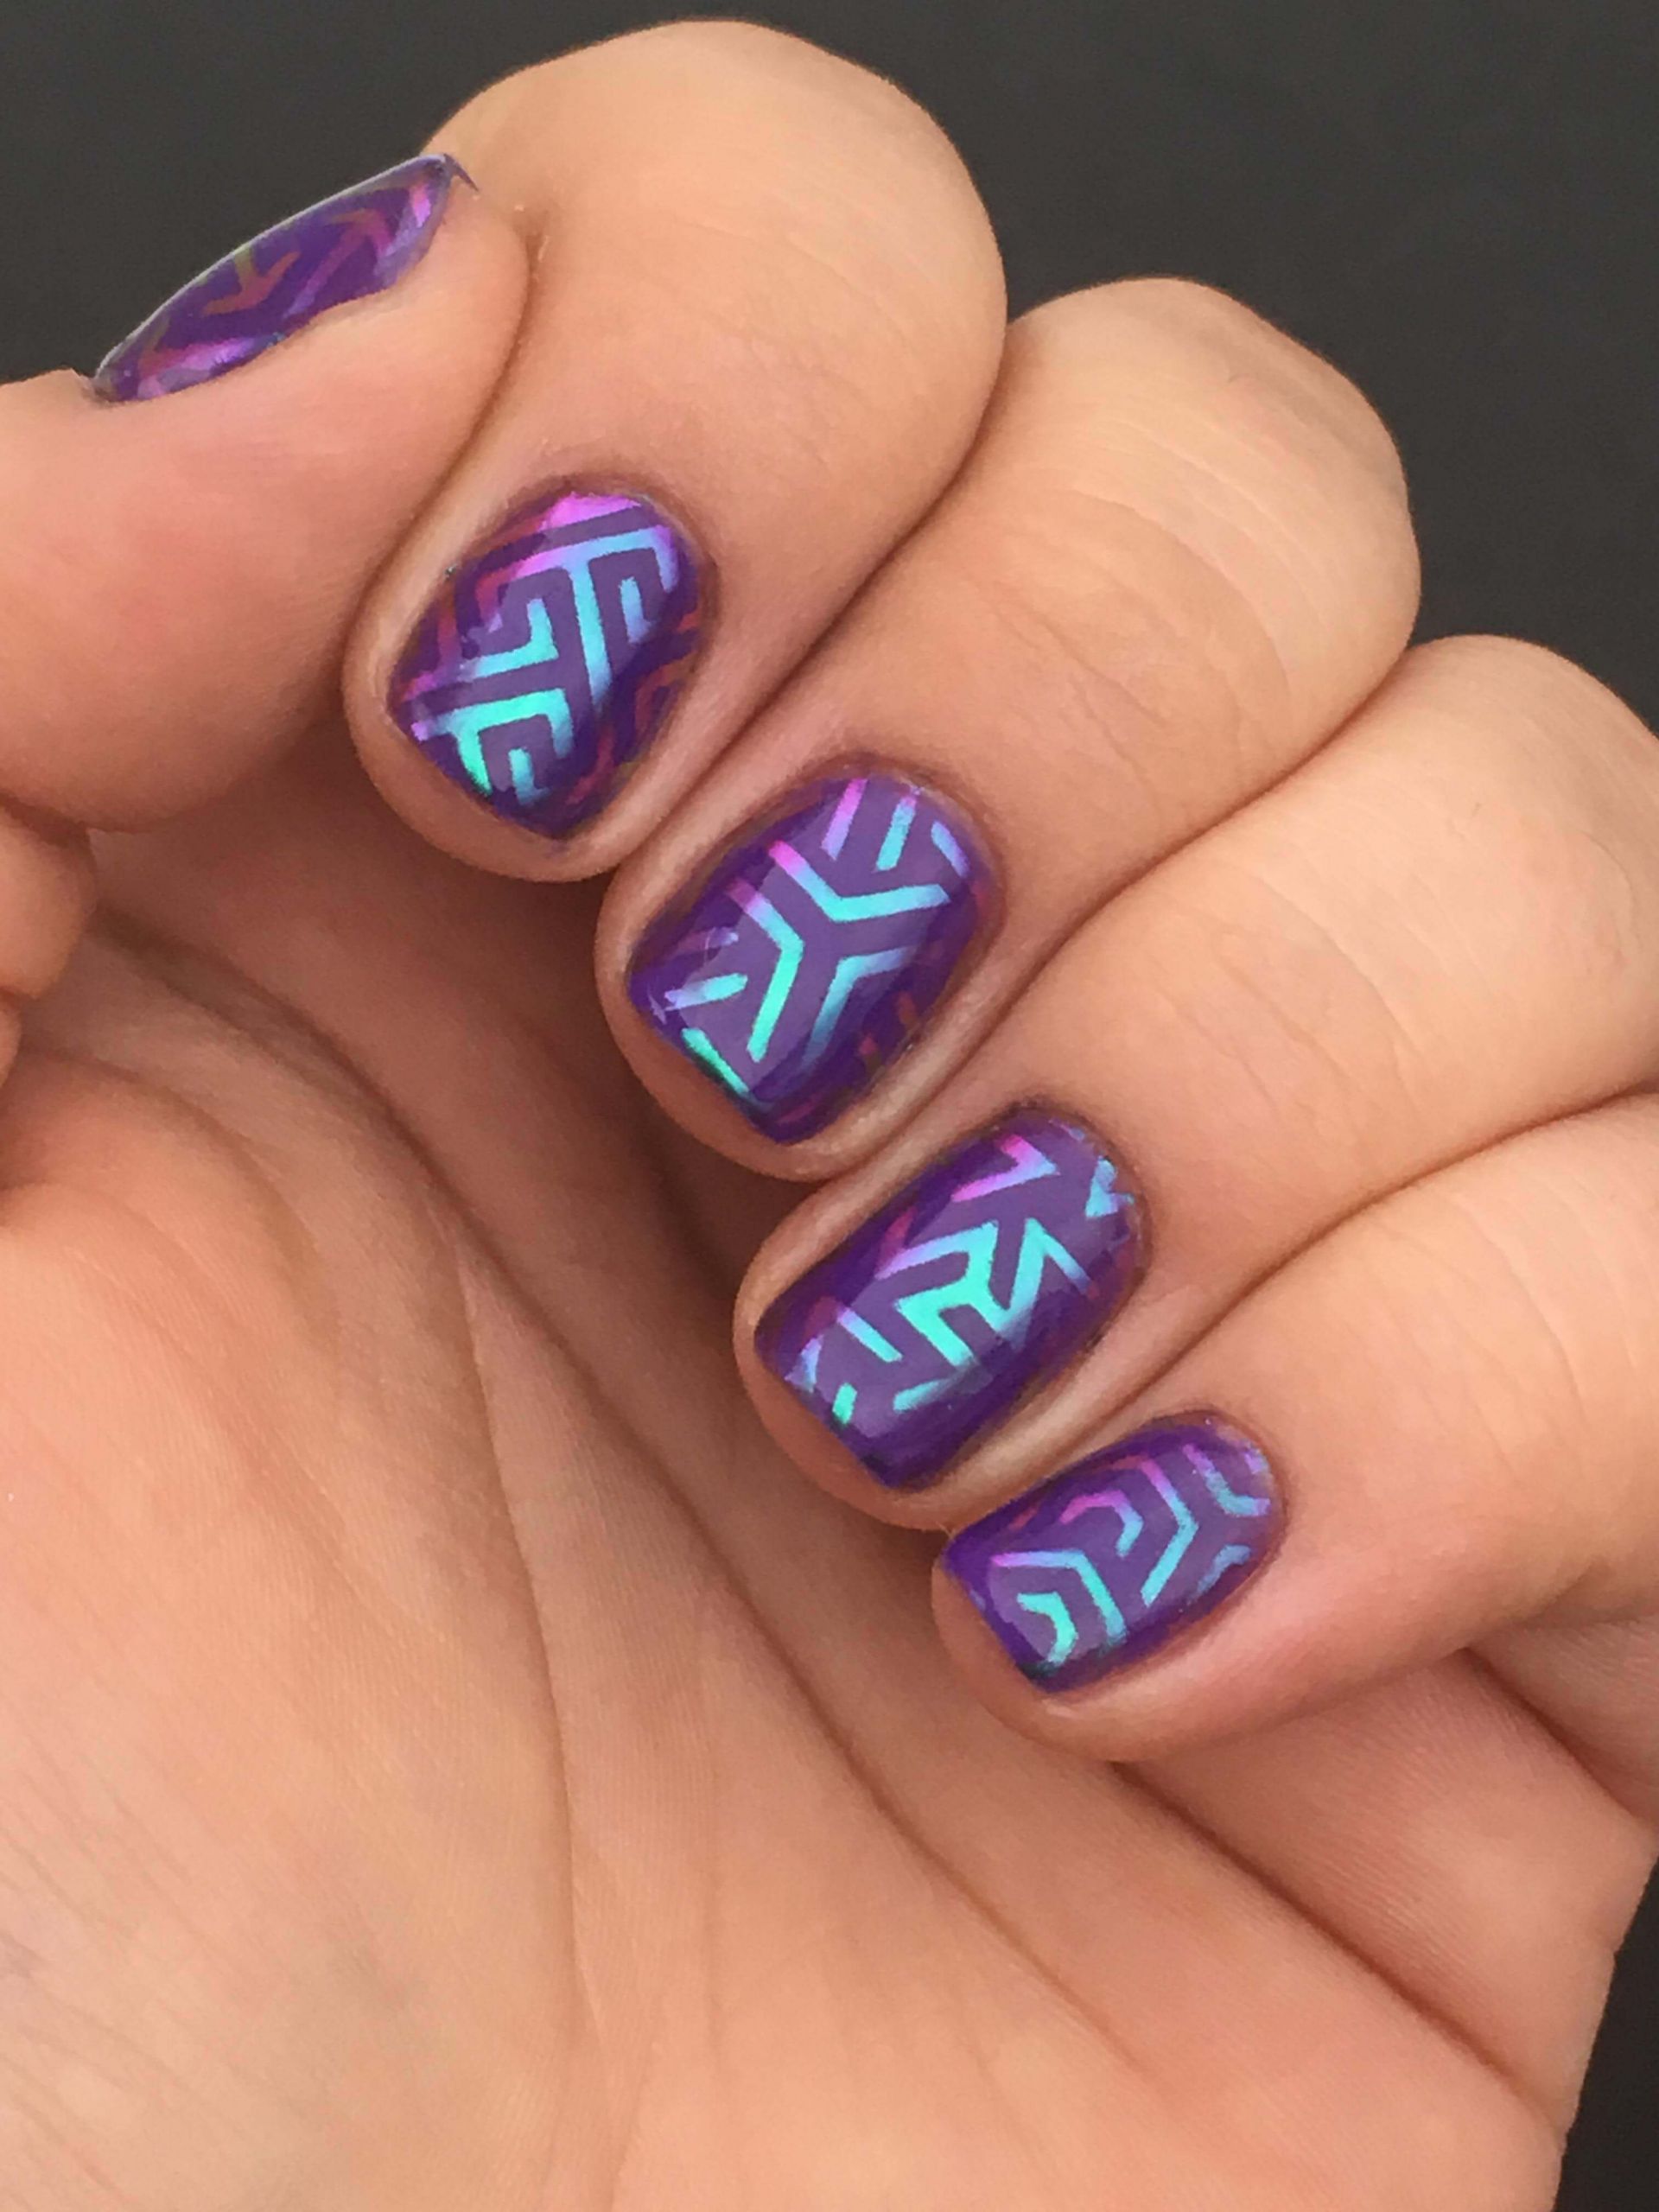 Www Nail Art
 Learn How To Make This Cool Geometric Nail Art With